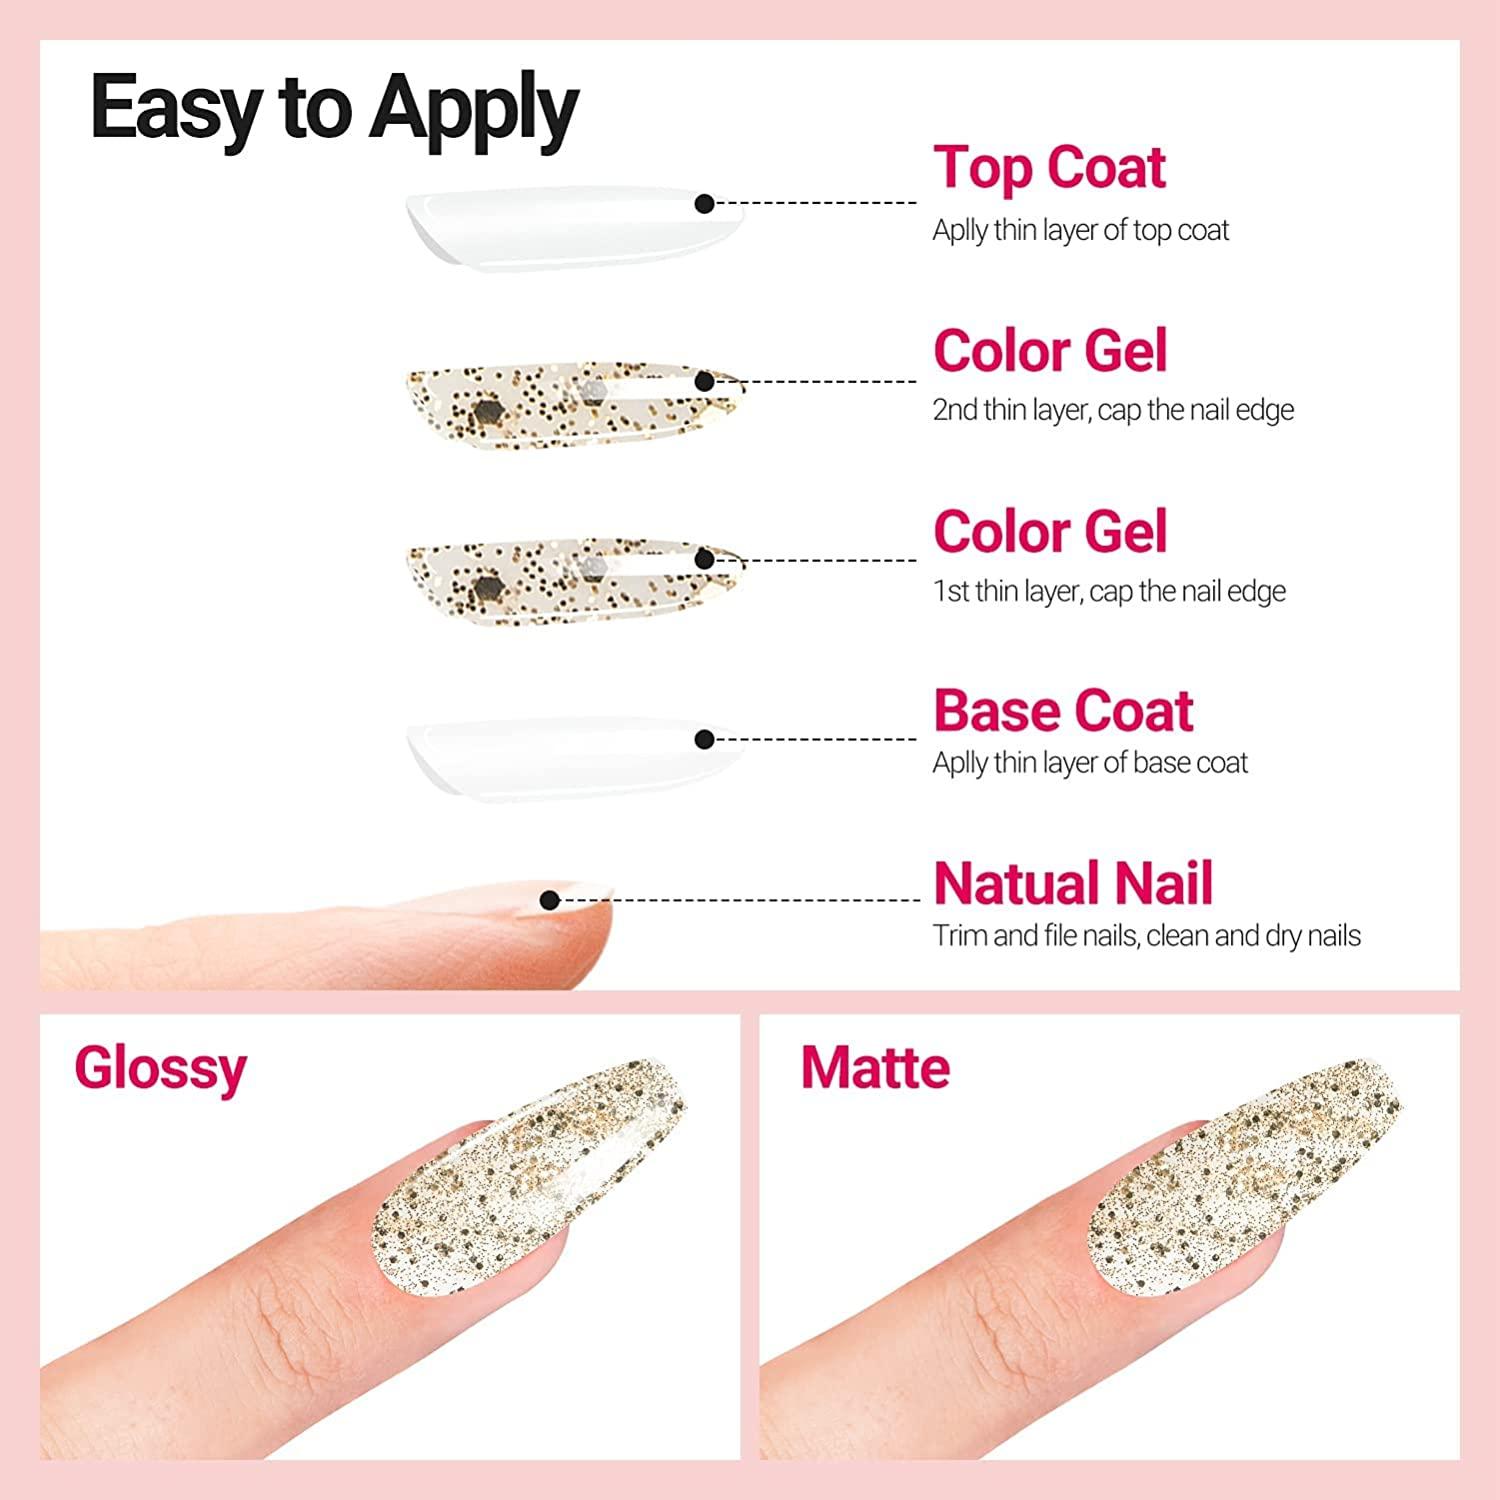 Gold and Silver Gel Nail Polish, 2 Colors Glitter Shimmer Gold Silver Nail  Polish Kit, U V Soak Off No Chip Gel Manicure Kit Salon DIY At Home Gold &  Silver